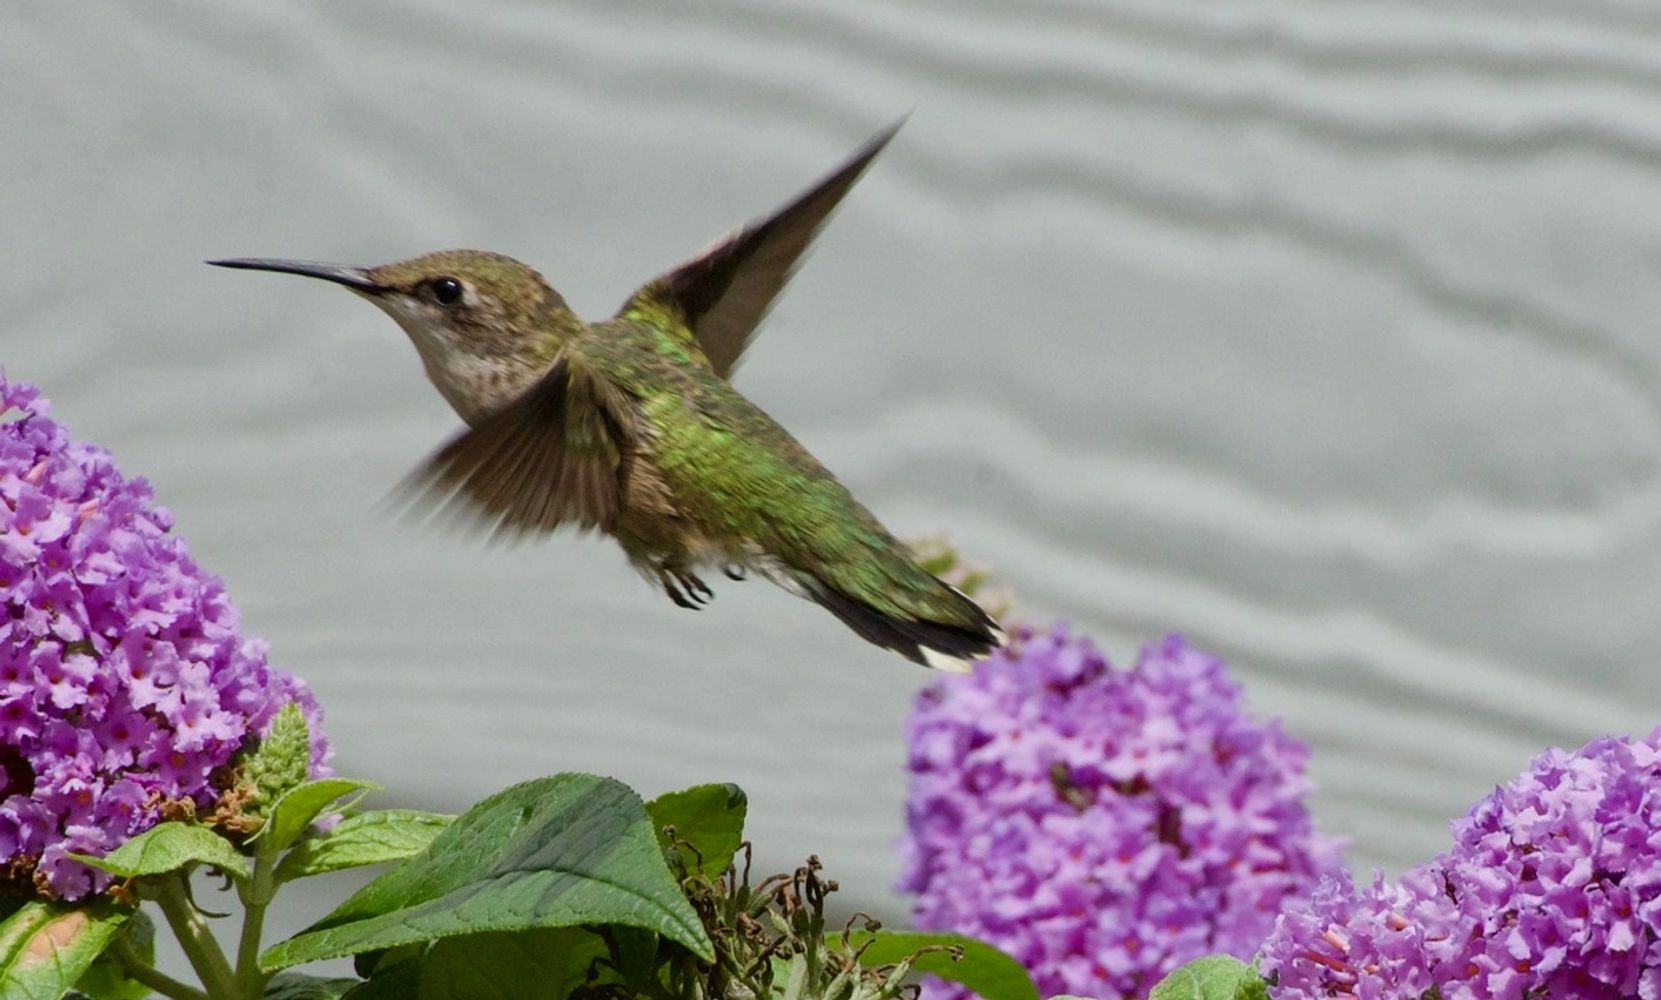 A female Ruby-throated hummingbird flies past a white painted house near lavender butterfly bushes, 